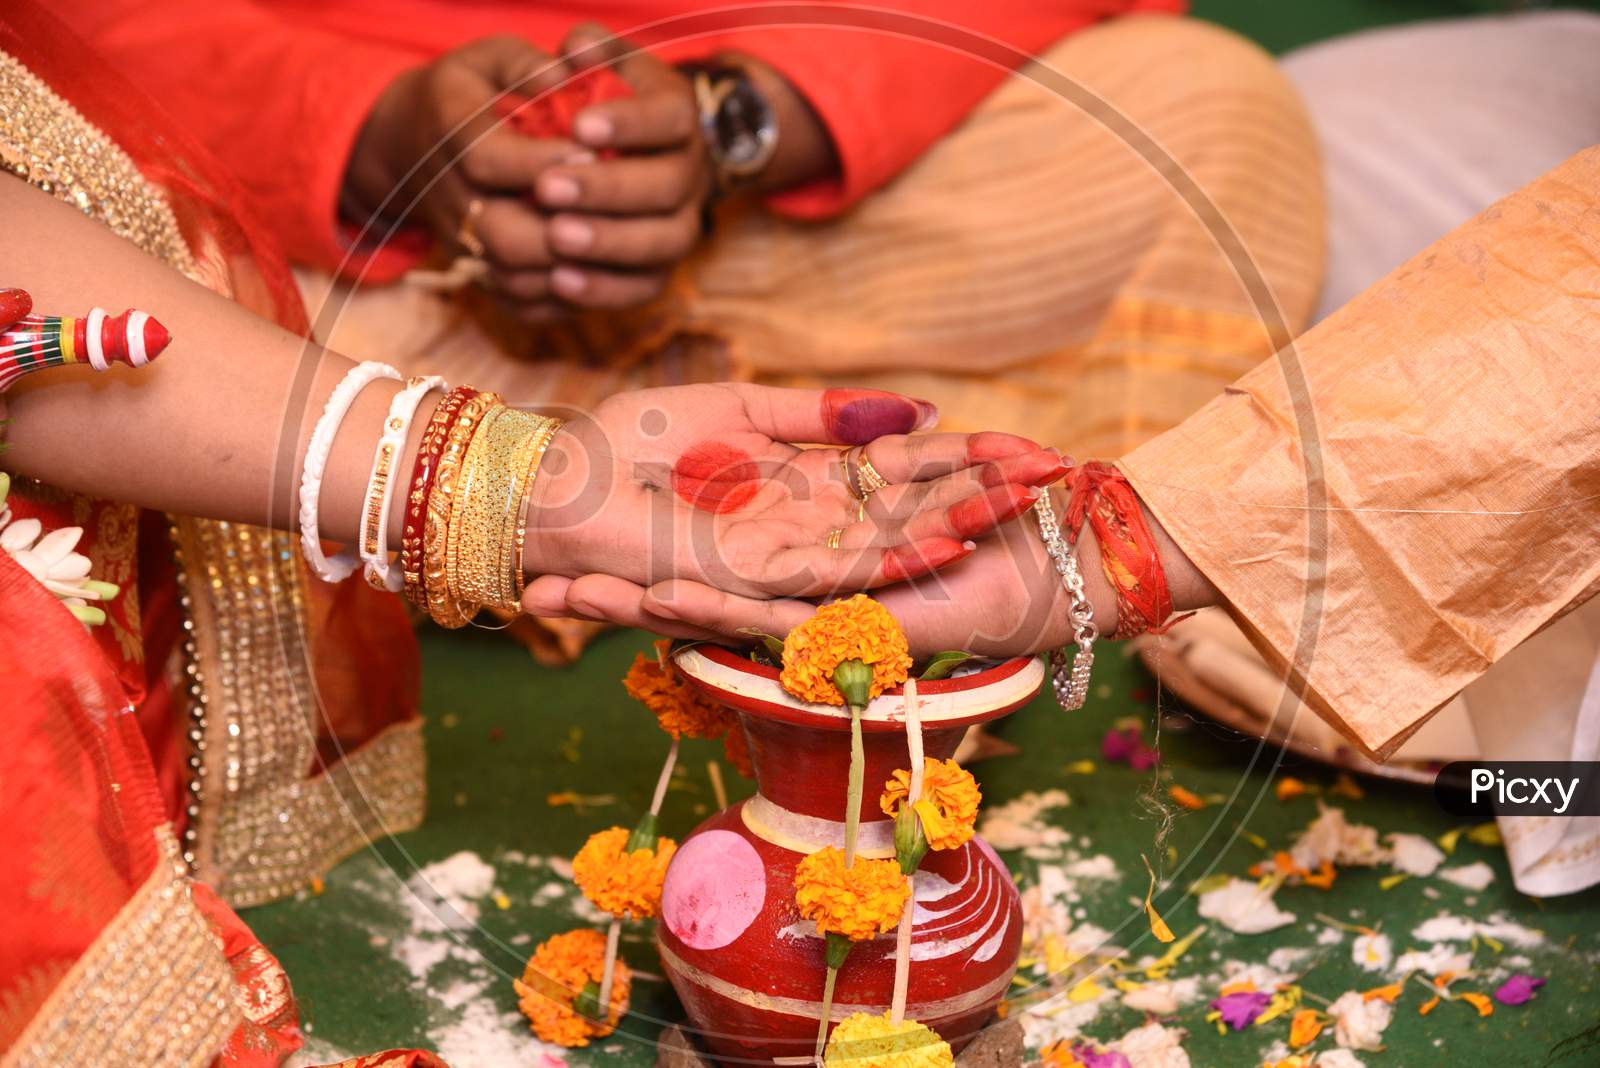 Groom And Bride'S Palm Kept On Each Other During Hindi Bengali Marriage Rituals.